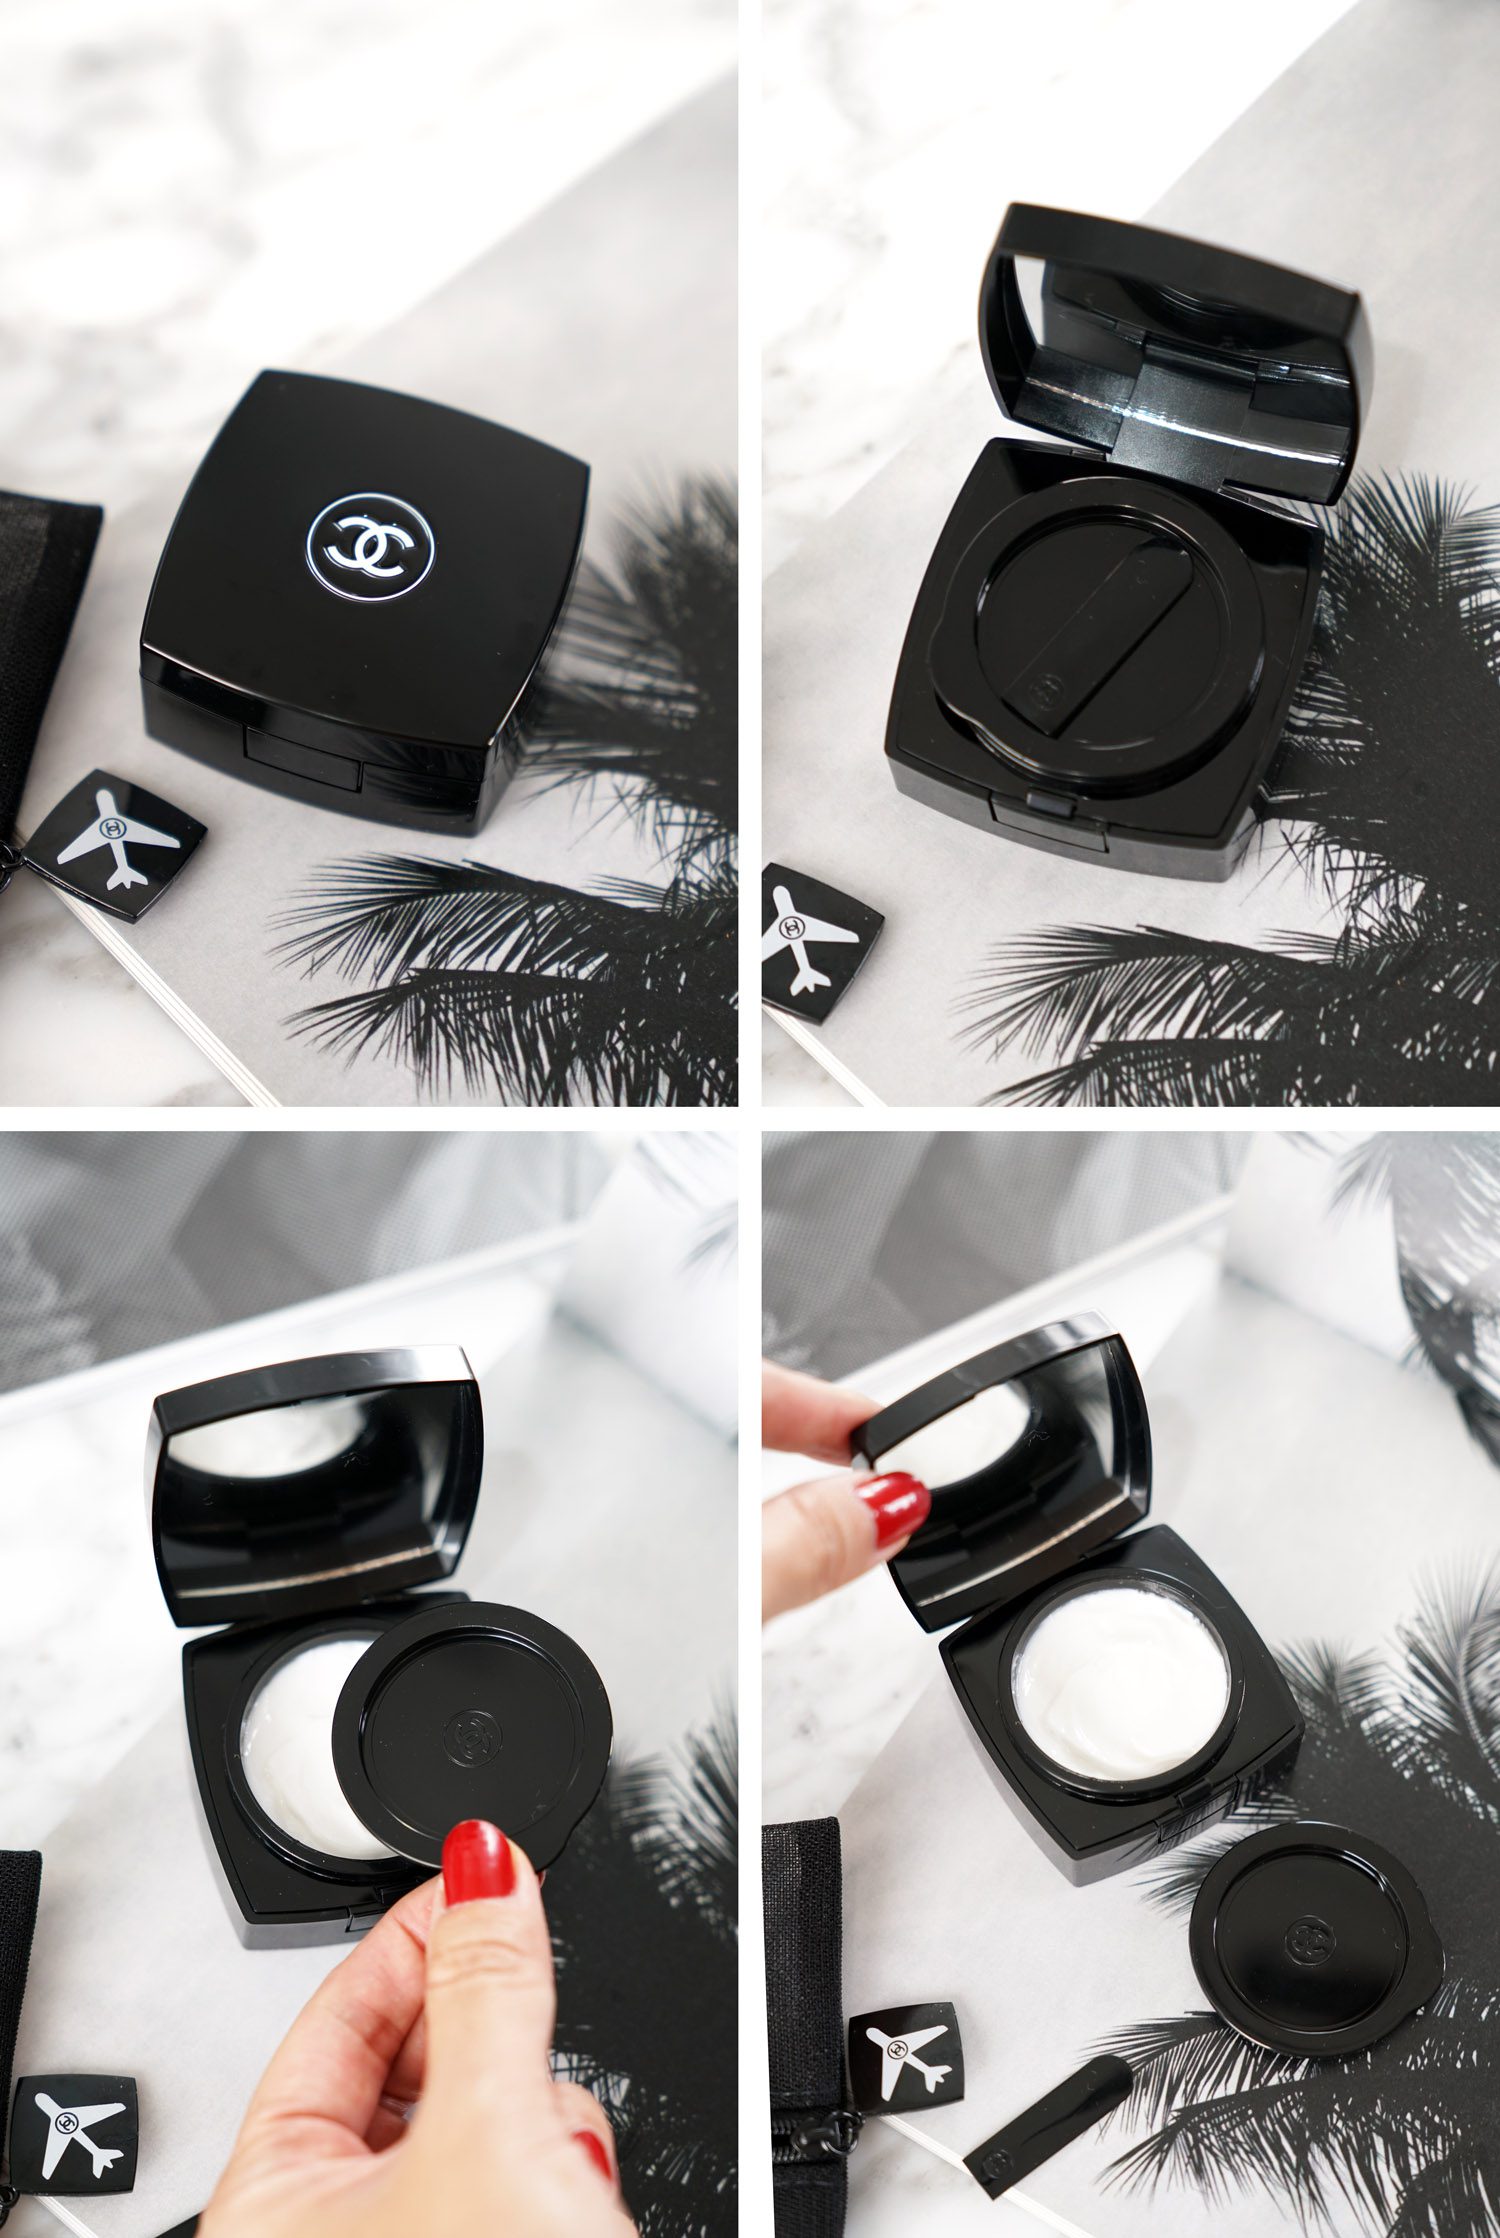 chanel travel size skincare